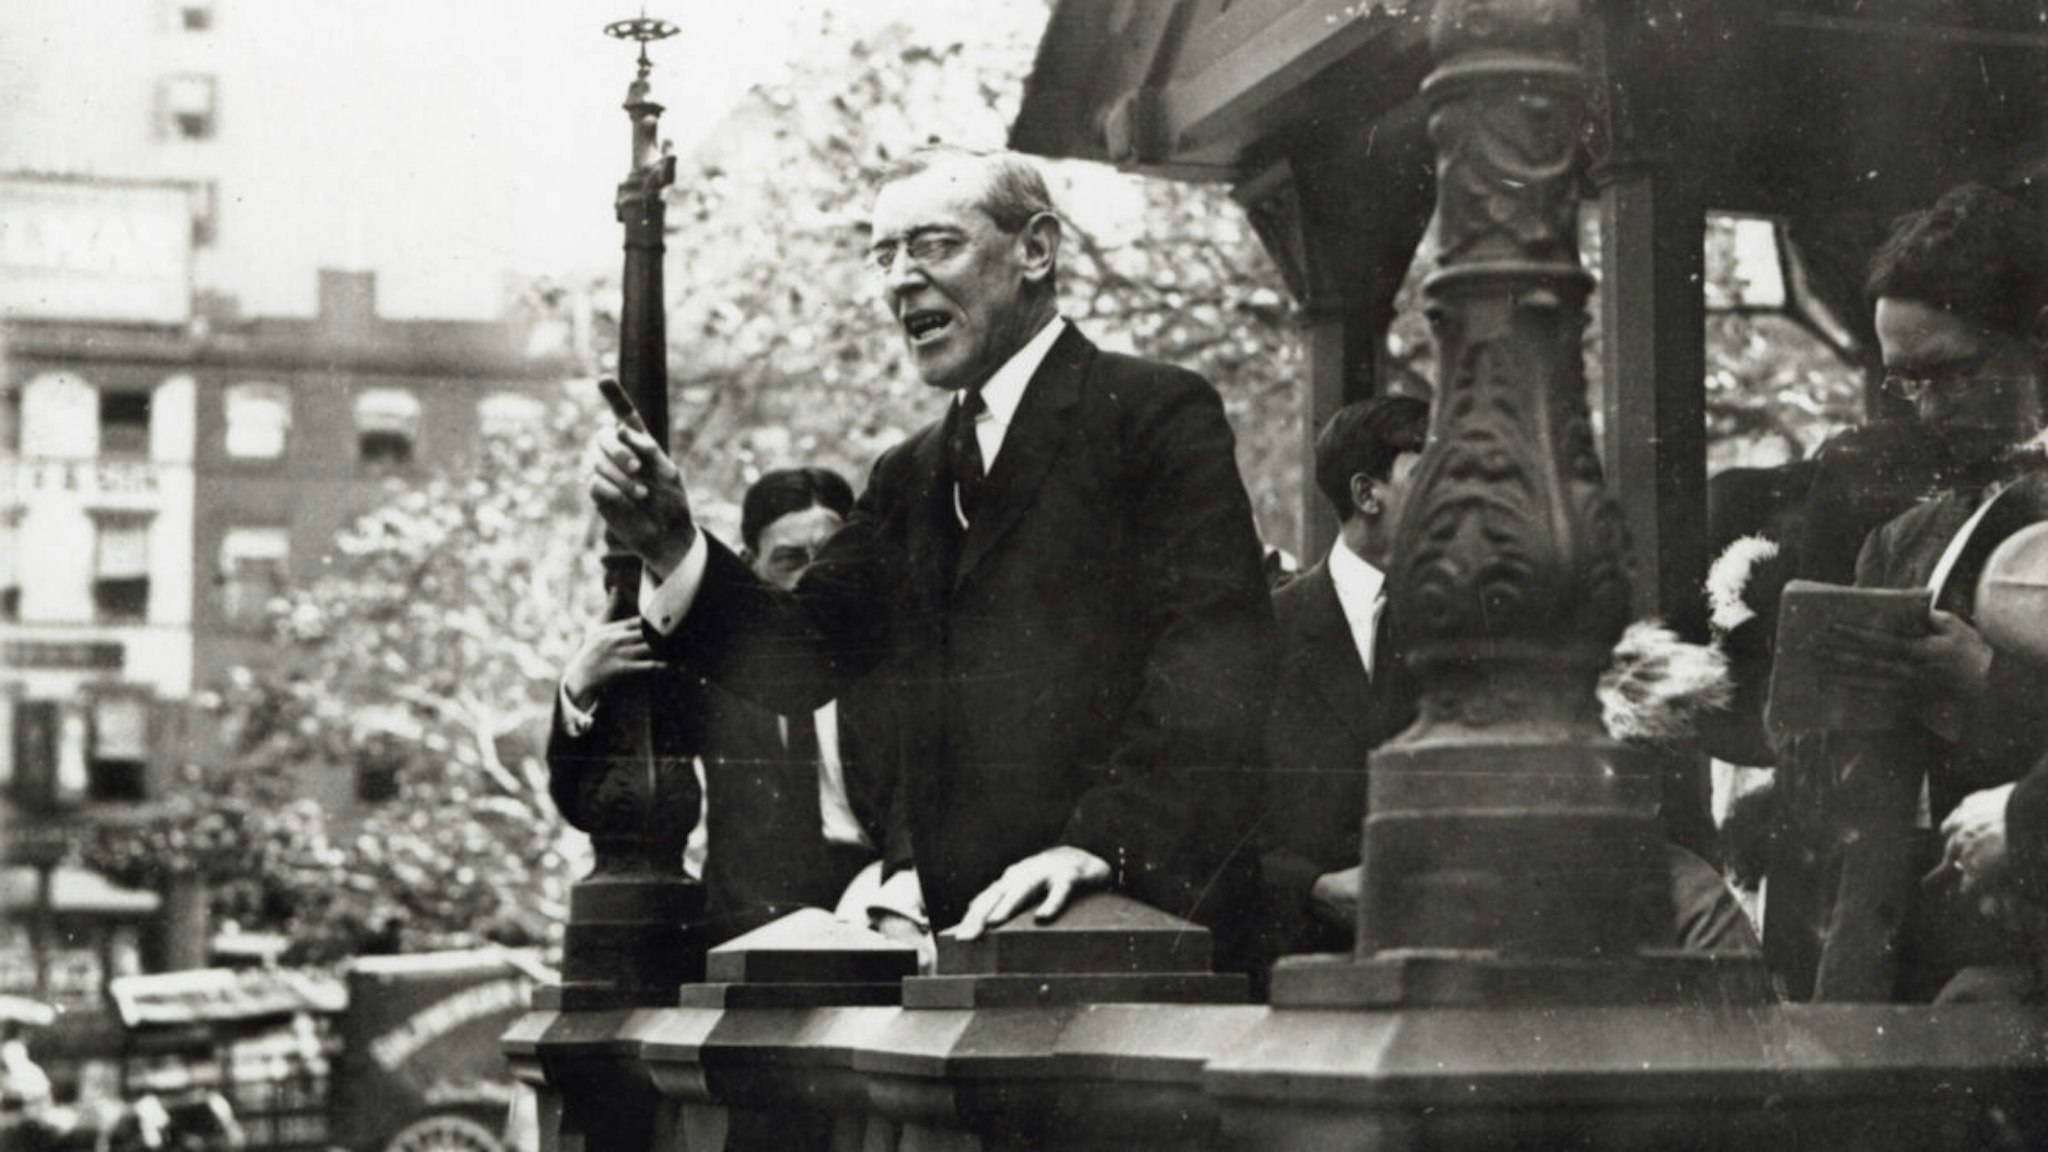 Presidential candidate Woodrow Wilson speaks to a crowd in Union Square.